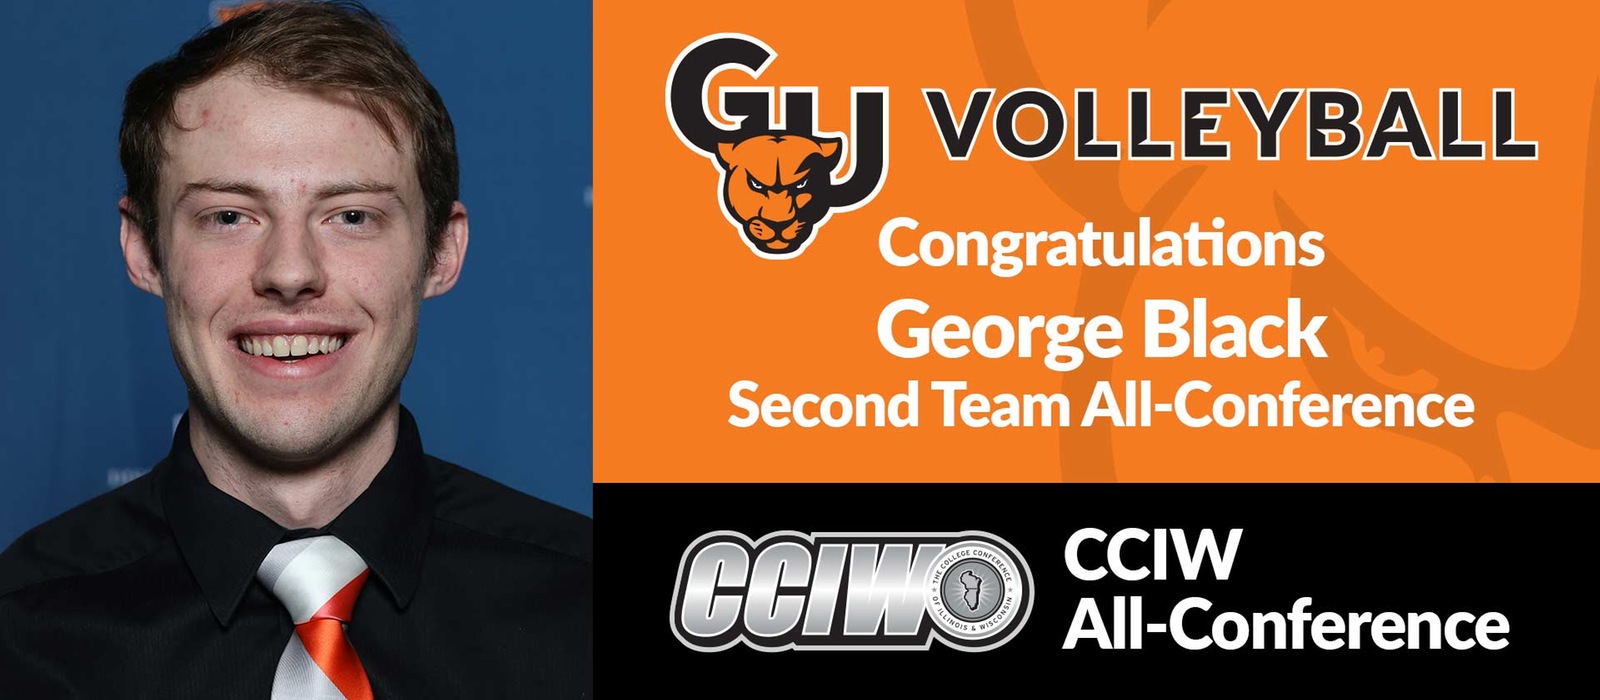 Men's volleyball represented by George Black on CCIW all-conference team